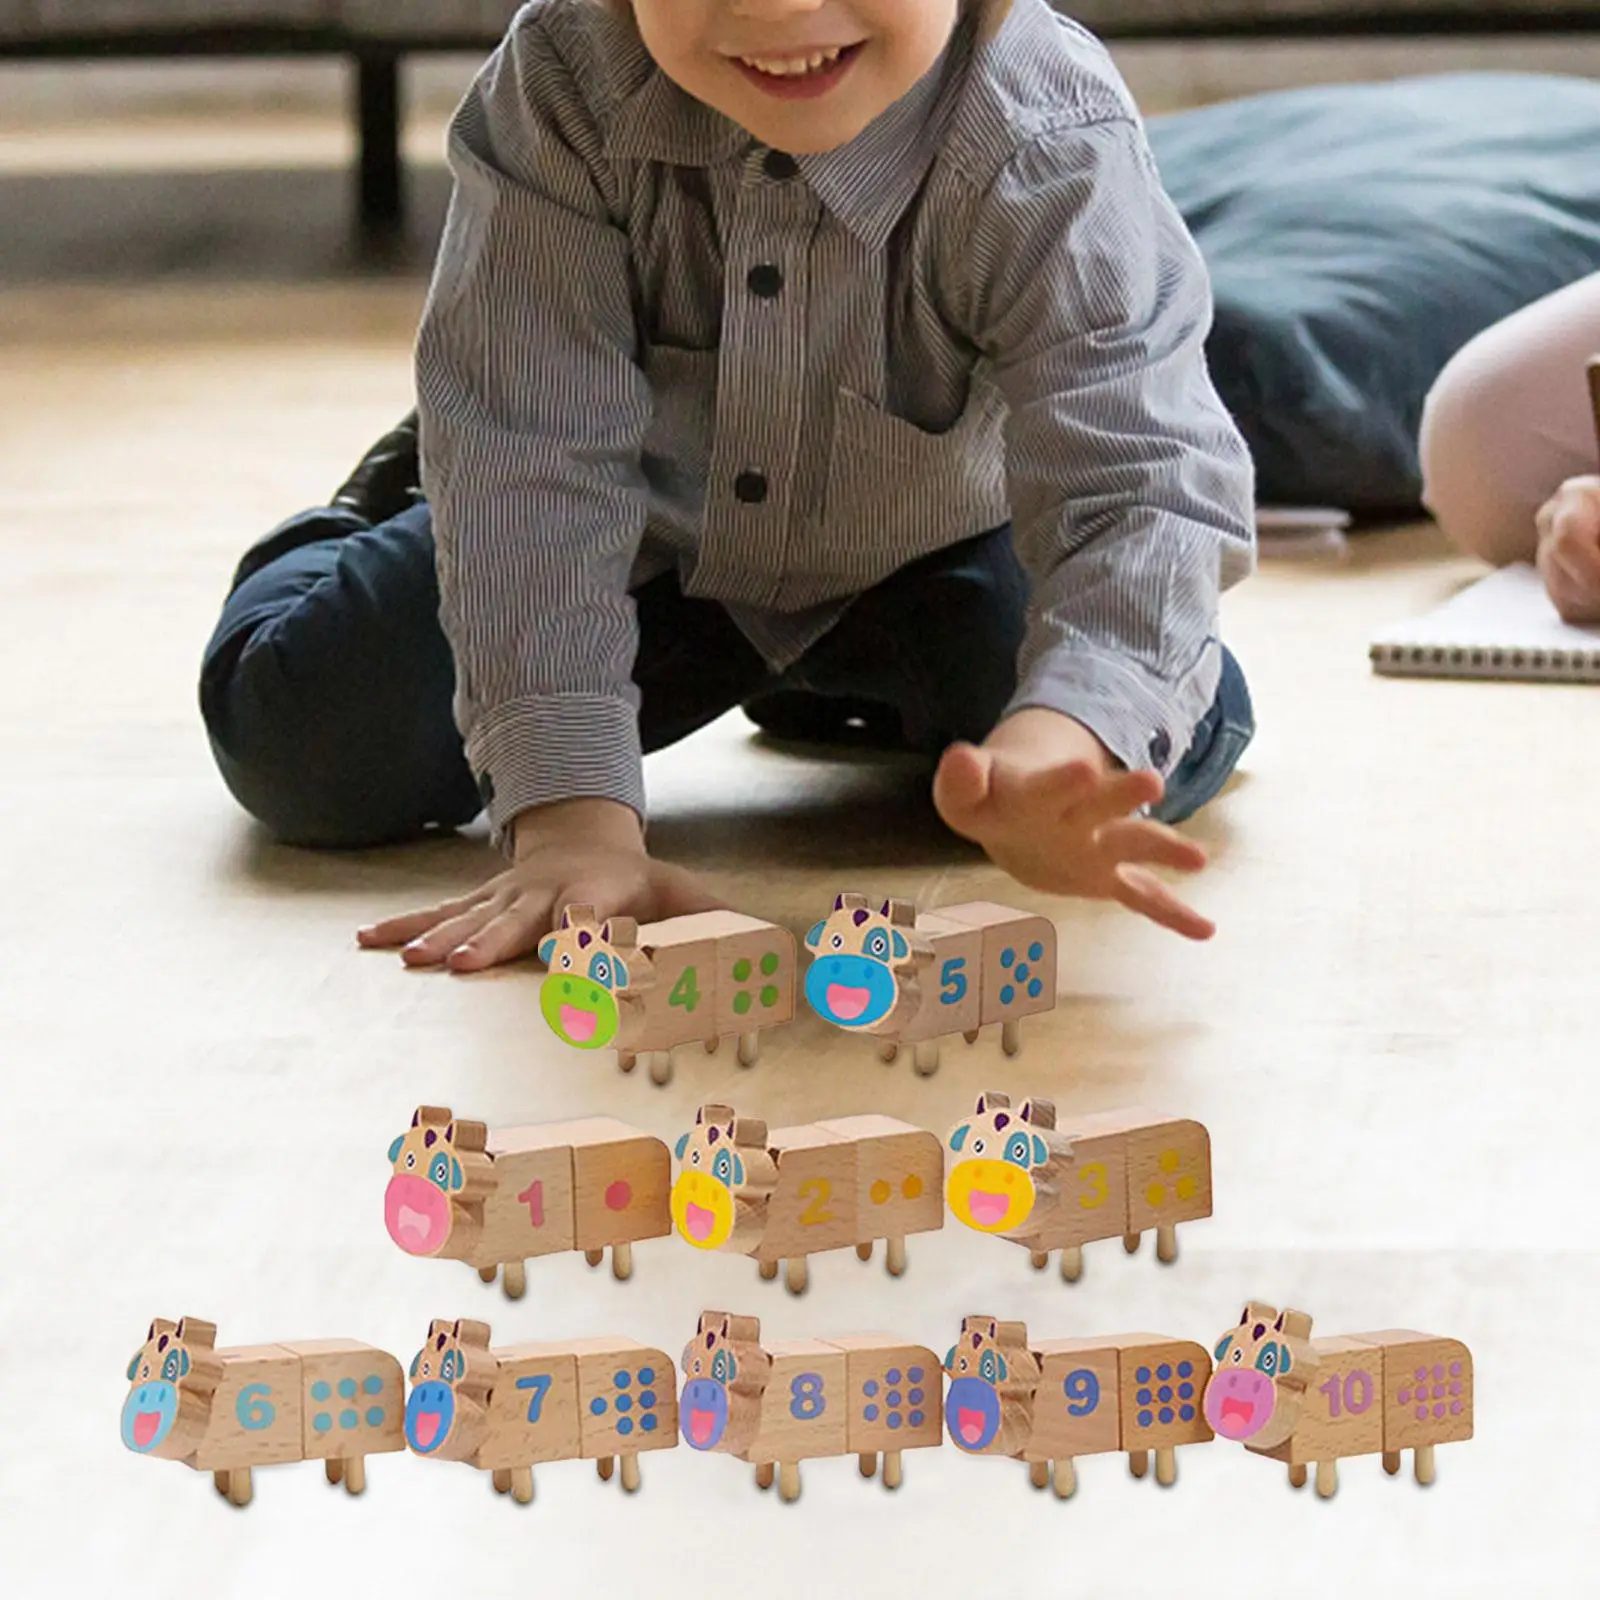 10x Wooden Building Blocks for Toddlers Early Development Educational Learning Toys Montessori Toys for Kids Boys Holiday Gifts